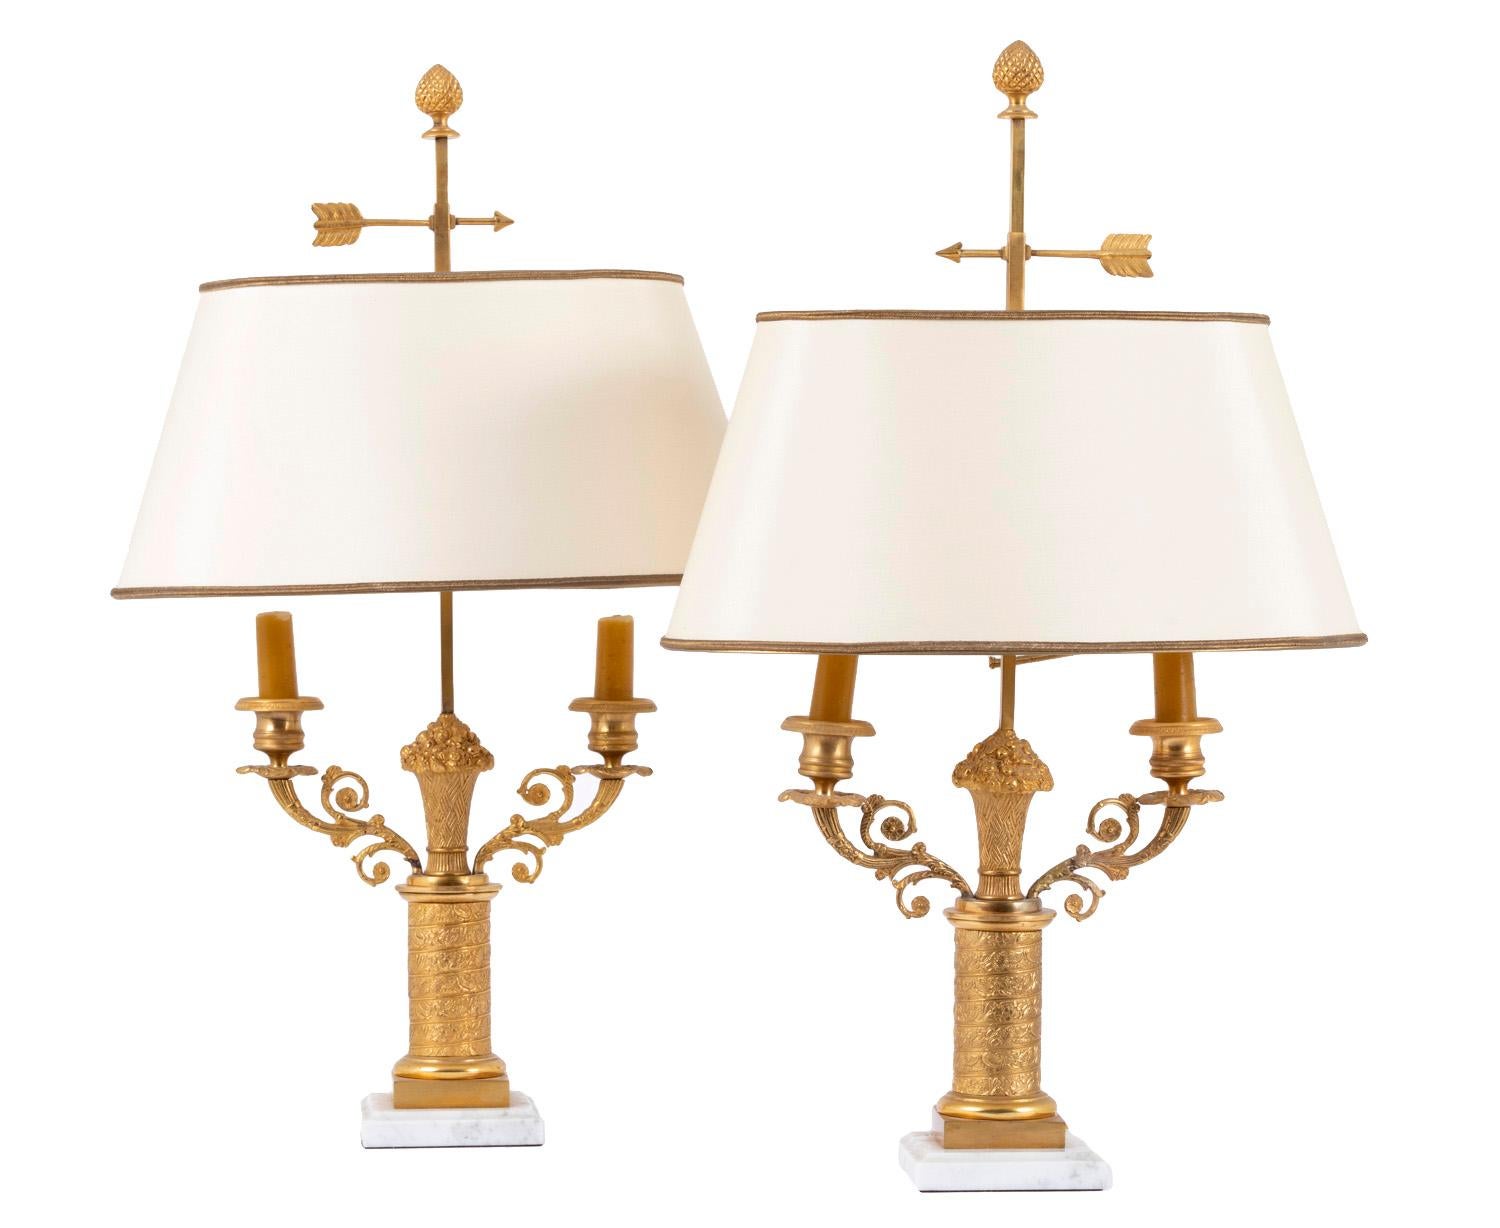 Pair of bouillotte lamps Restoration style in gilt bronze with two light sources. White veined Carrara marble square base topped with gilt and chiseled bronze structure. Gilt base topped with toric molding. Lamp shaft in column for is entirely